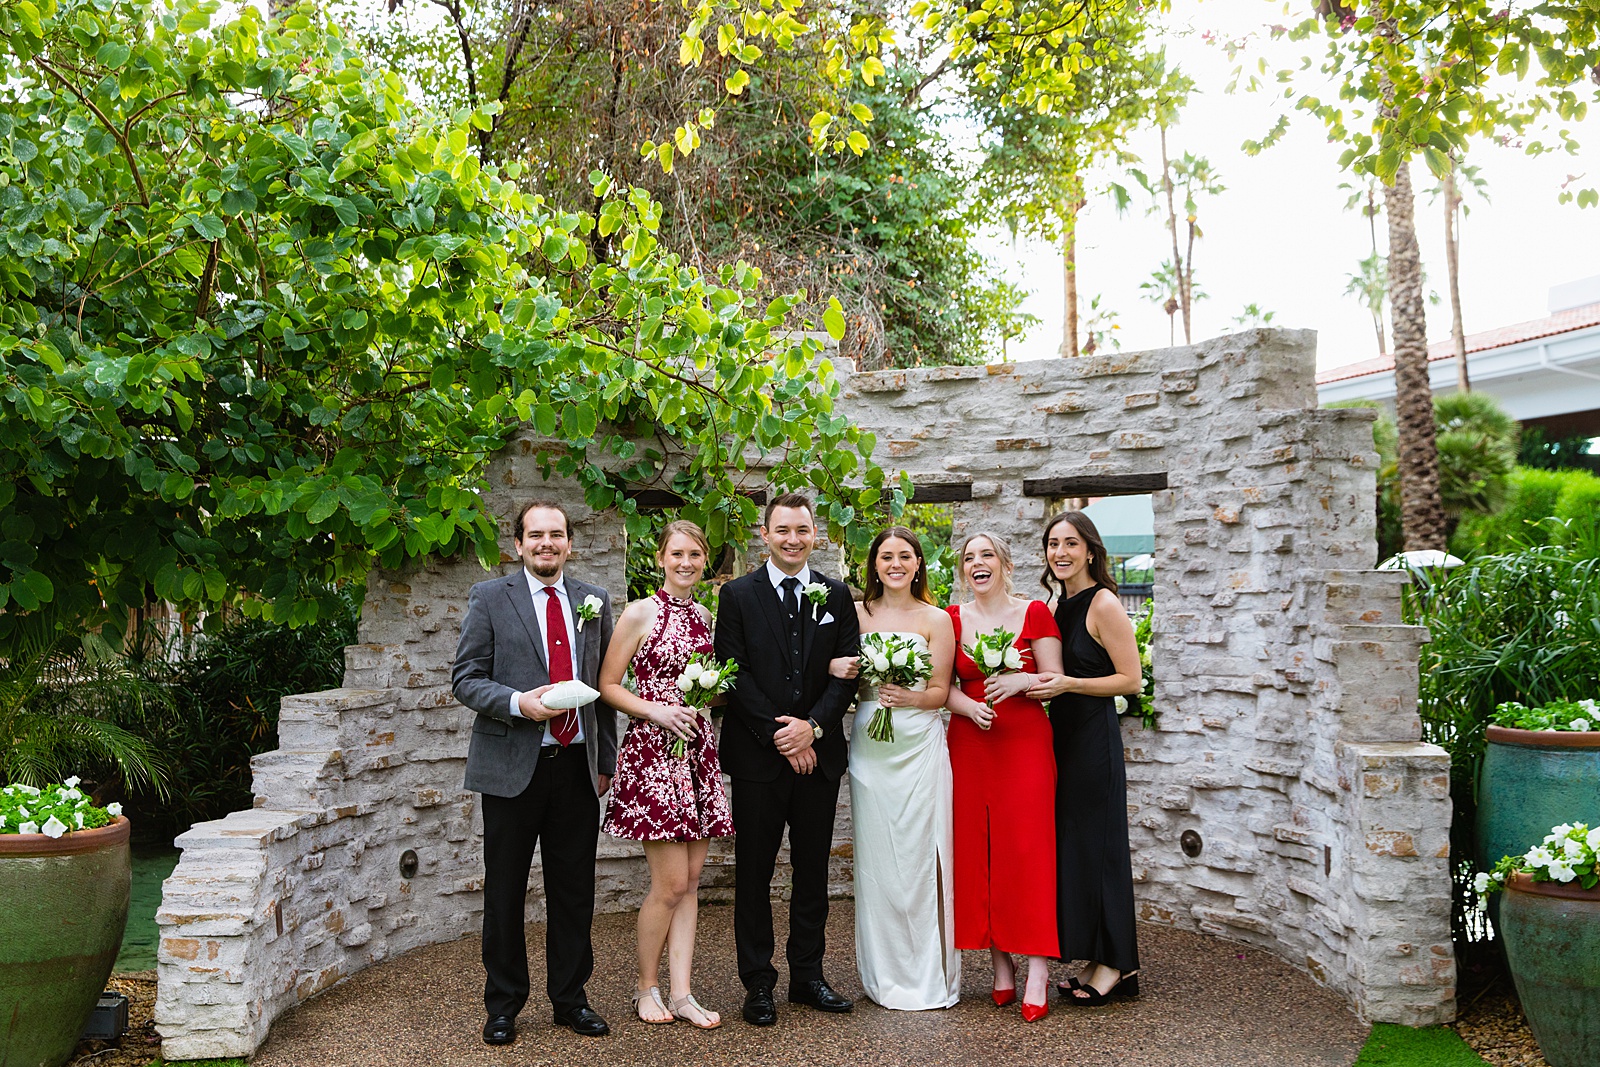 Groom with guests at The Scott wedding by Scottsdale wedding photographer PMA Photography